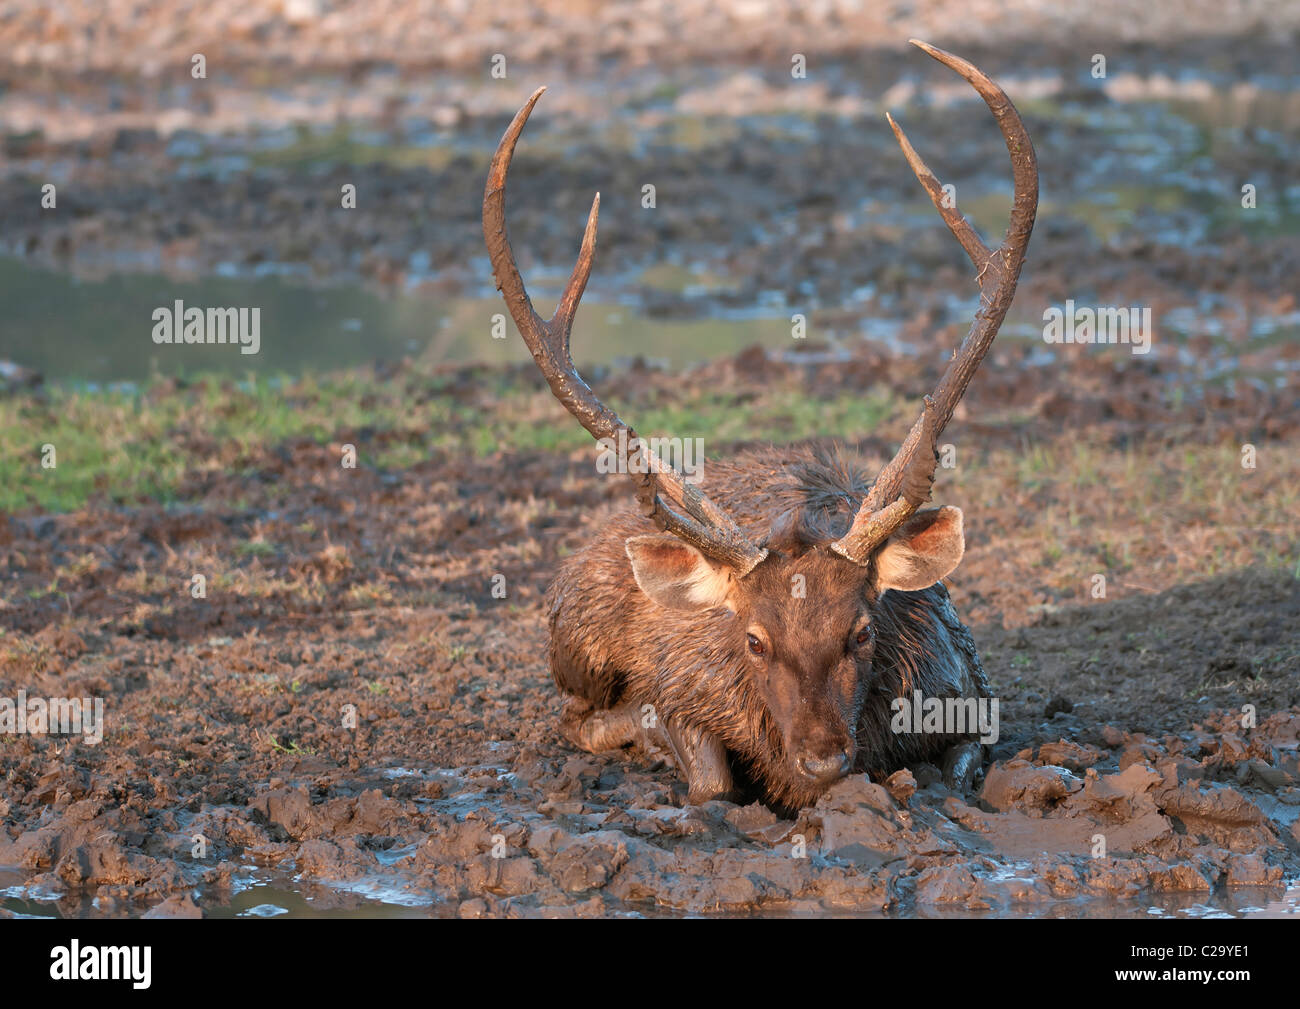 Samba Deer cooling off in the mud, Ranthambore NP, India Stock Photo